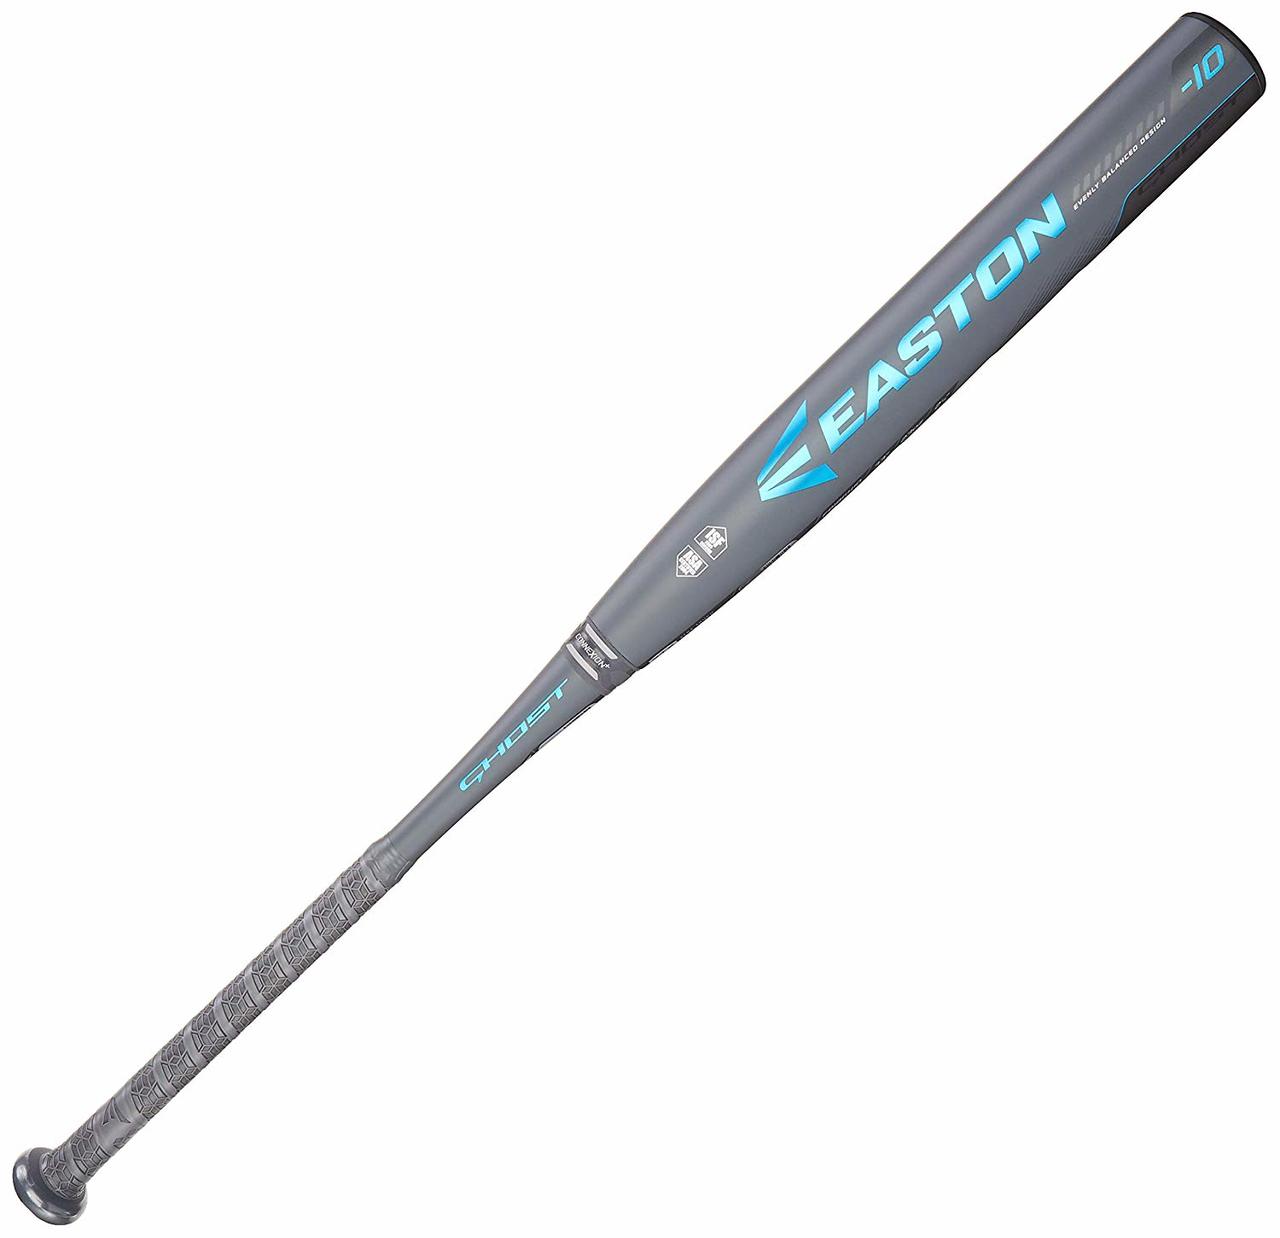 easton-ghost-asa-fastpitch-softball-bat-31-in-21-oz-fp18gh10 FP18GH10-3121 Easton 628412172544 Lowest barrel compression in the game best-in-class acoustics at impact Maximum